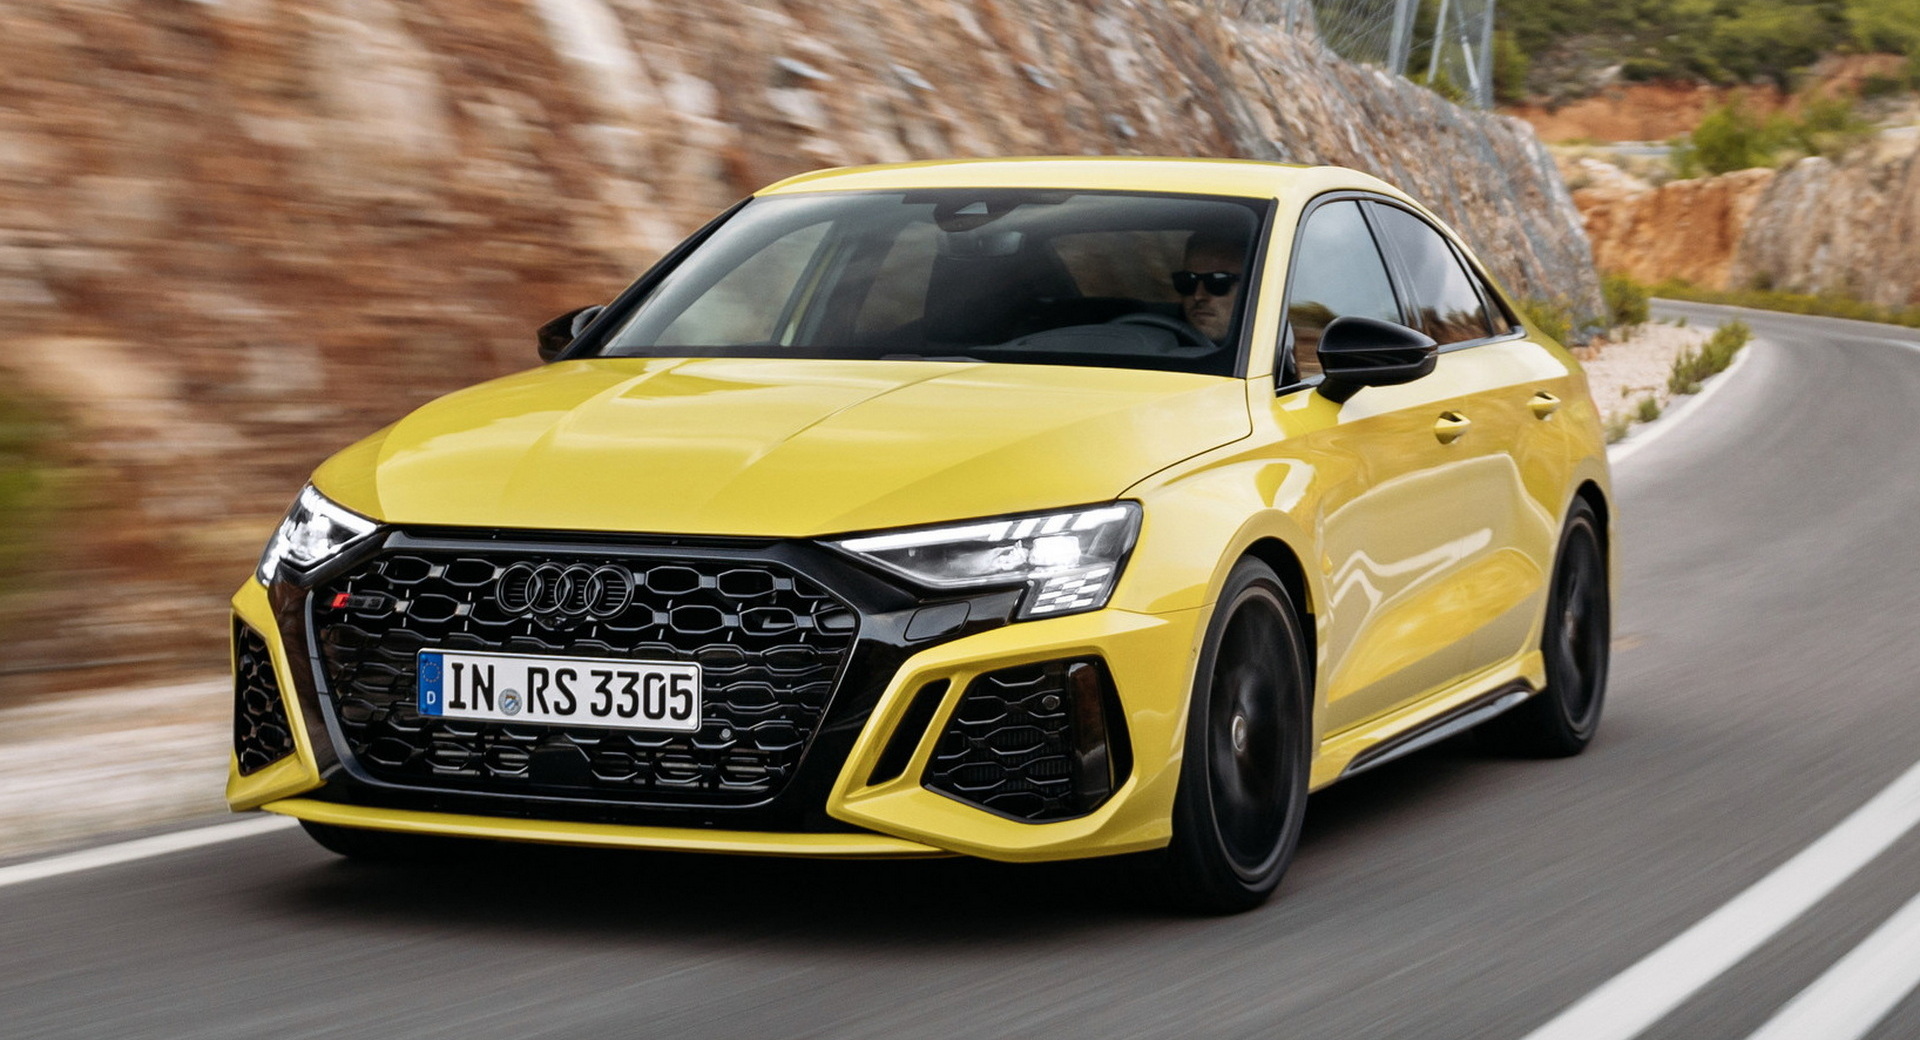 New 2022 Audi RS3 Arrives This Summer In The US Priced From $59,095